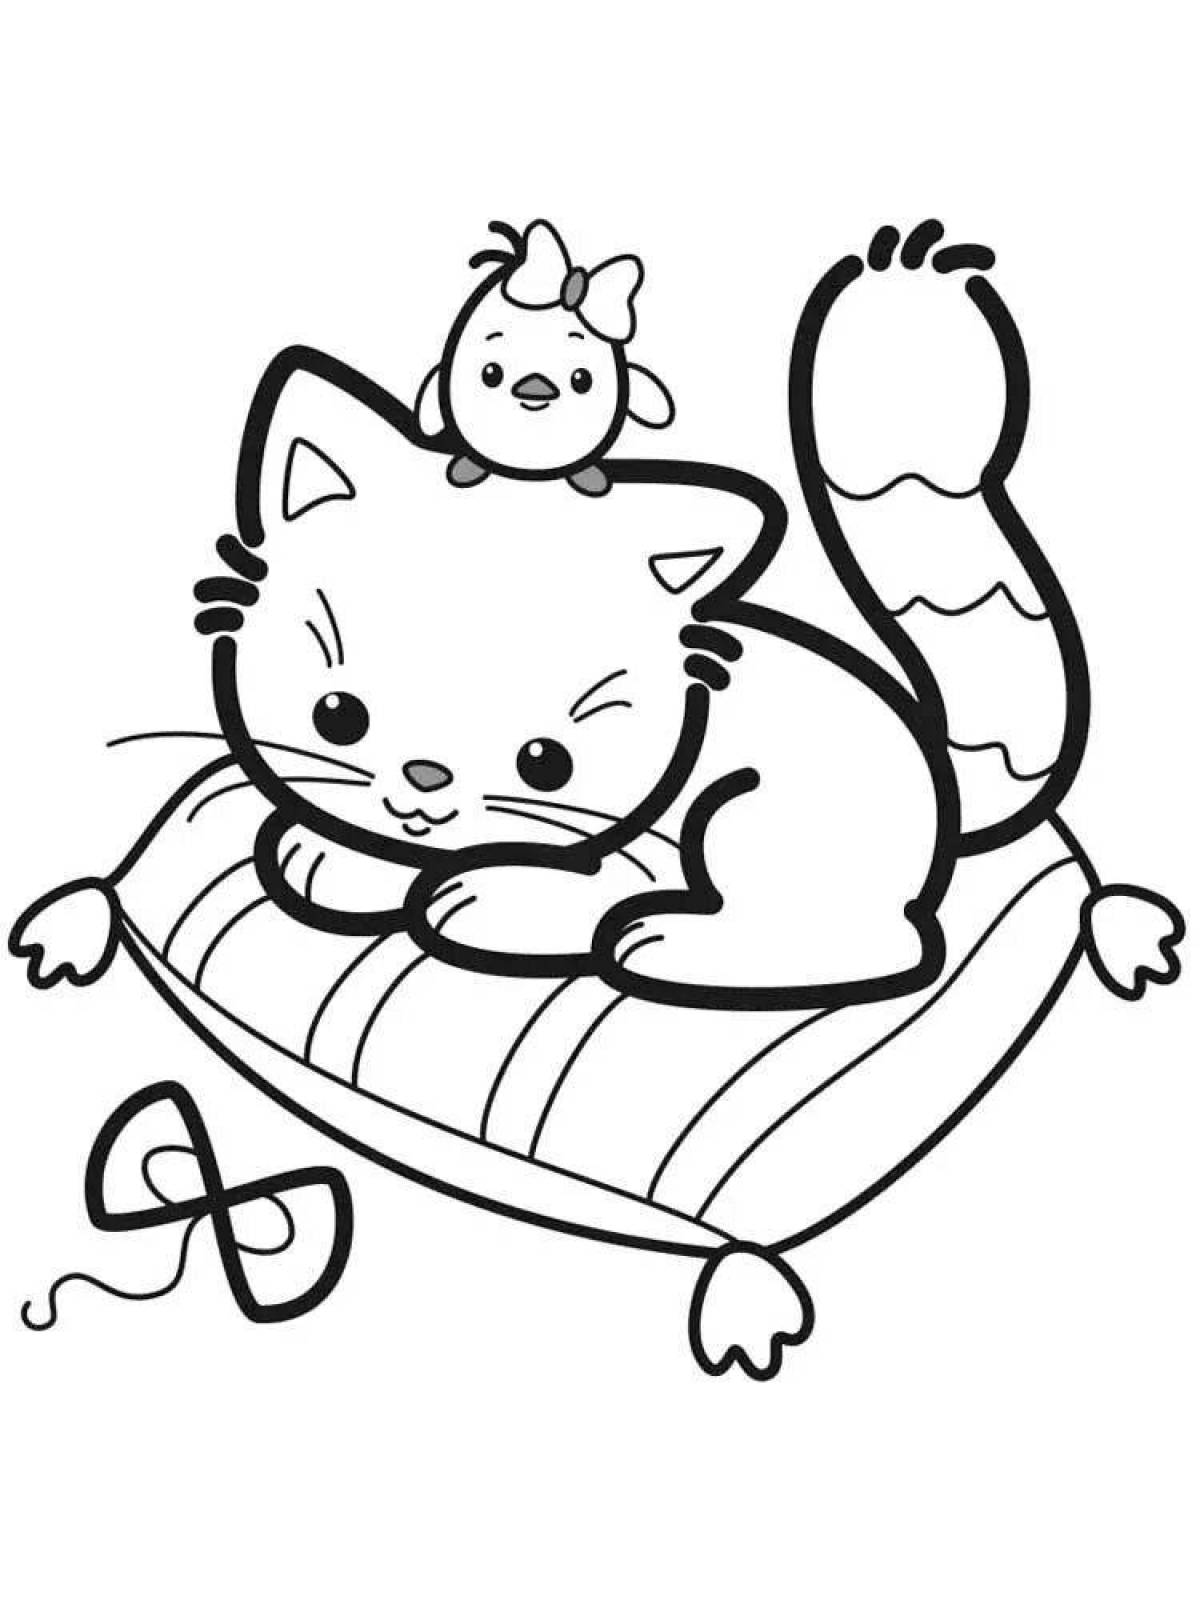 Cute cat coloring pages for kids